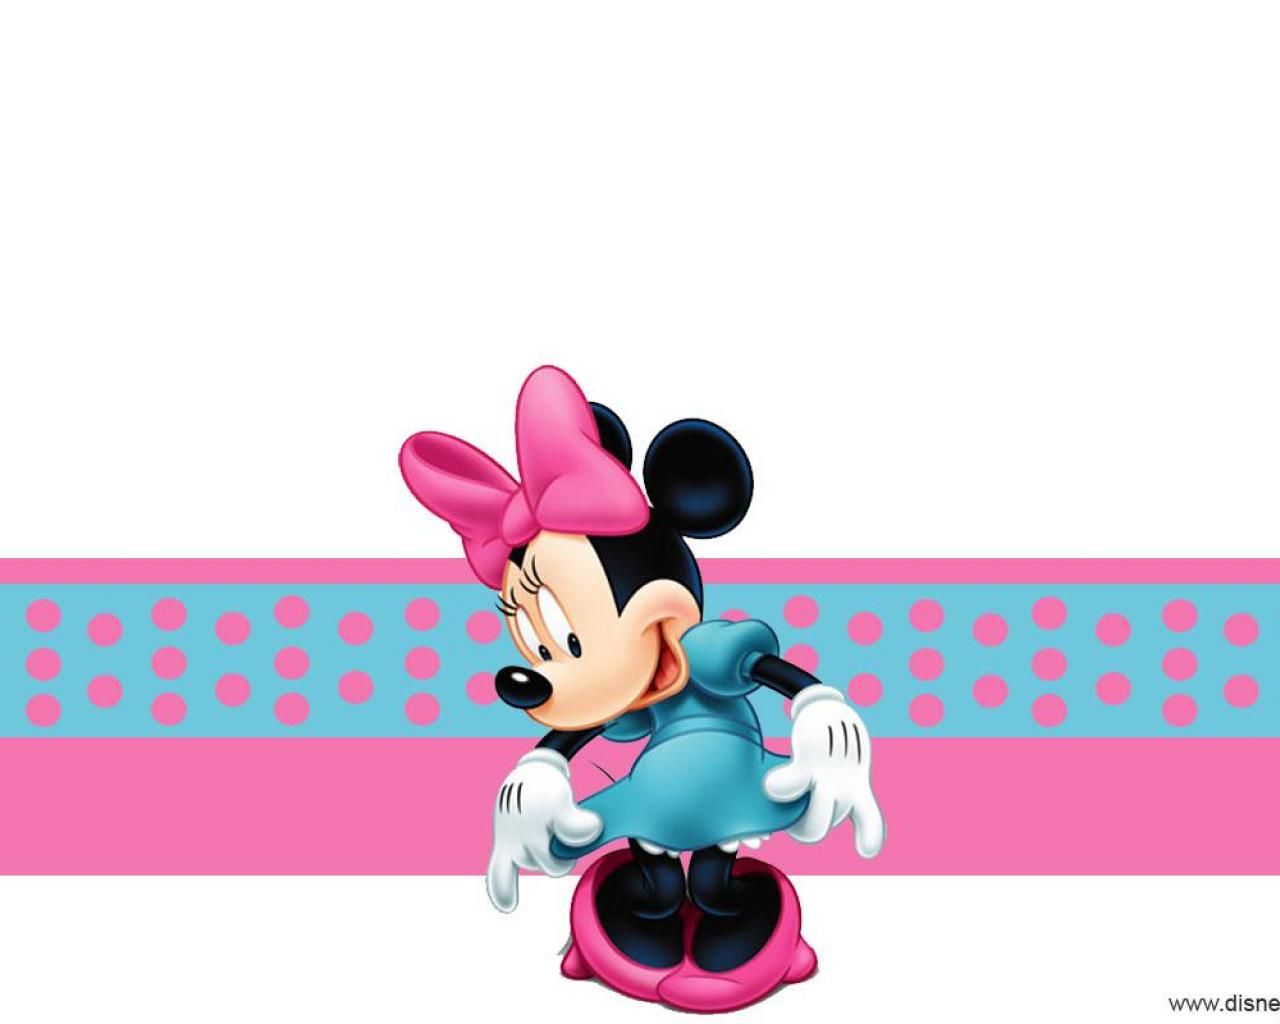 Minnie mouse - (#138642) - High Quality and Resolution Wallpapers ...